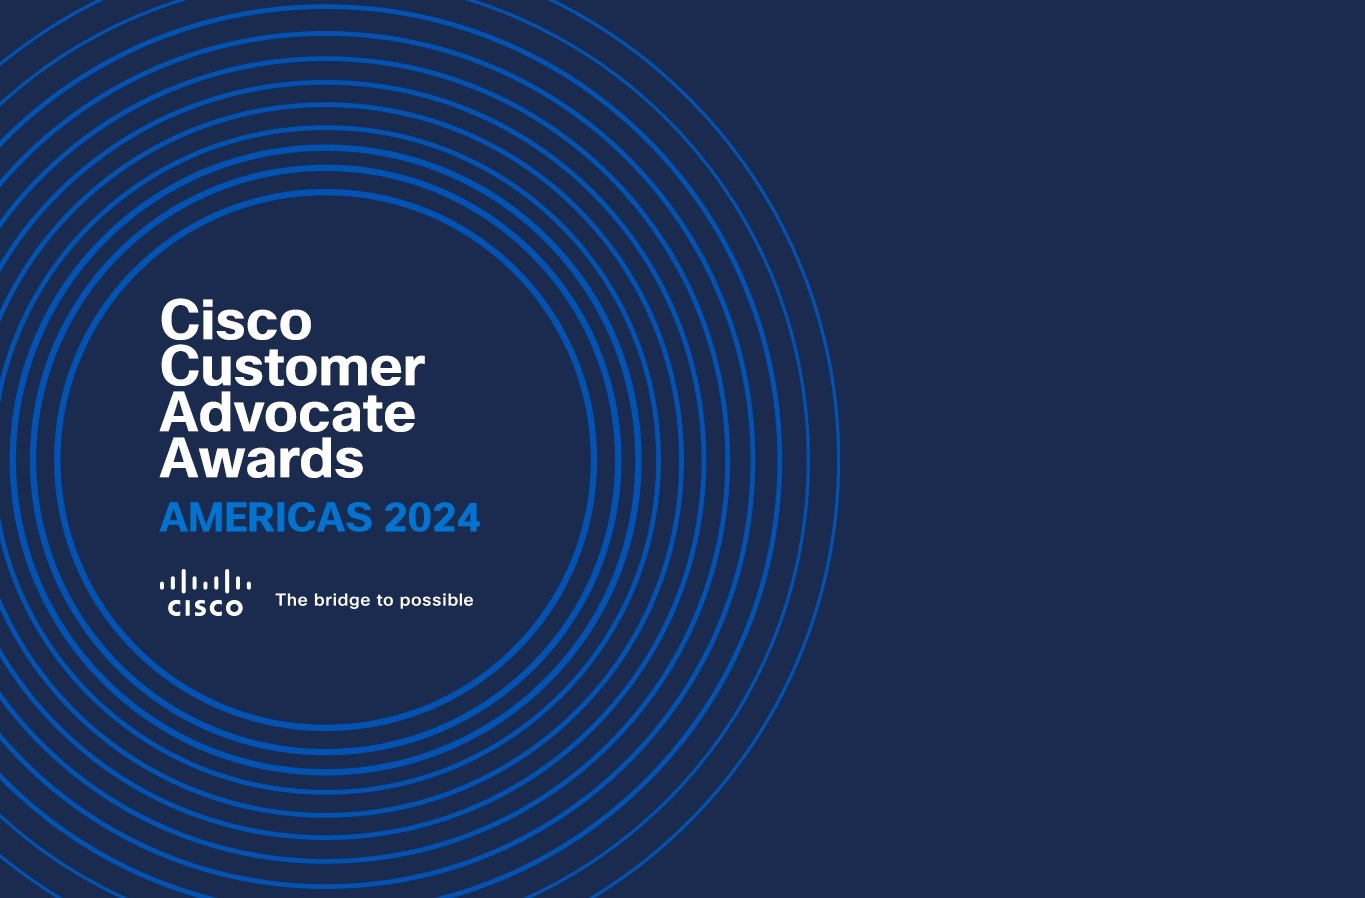 Better of the Finest: Cisco Buyer Advocate Awards: Americas 2024 Winners